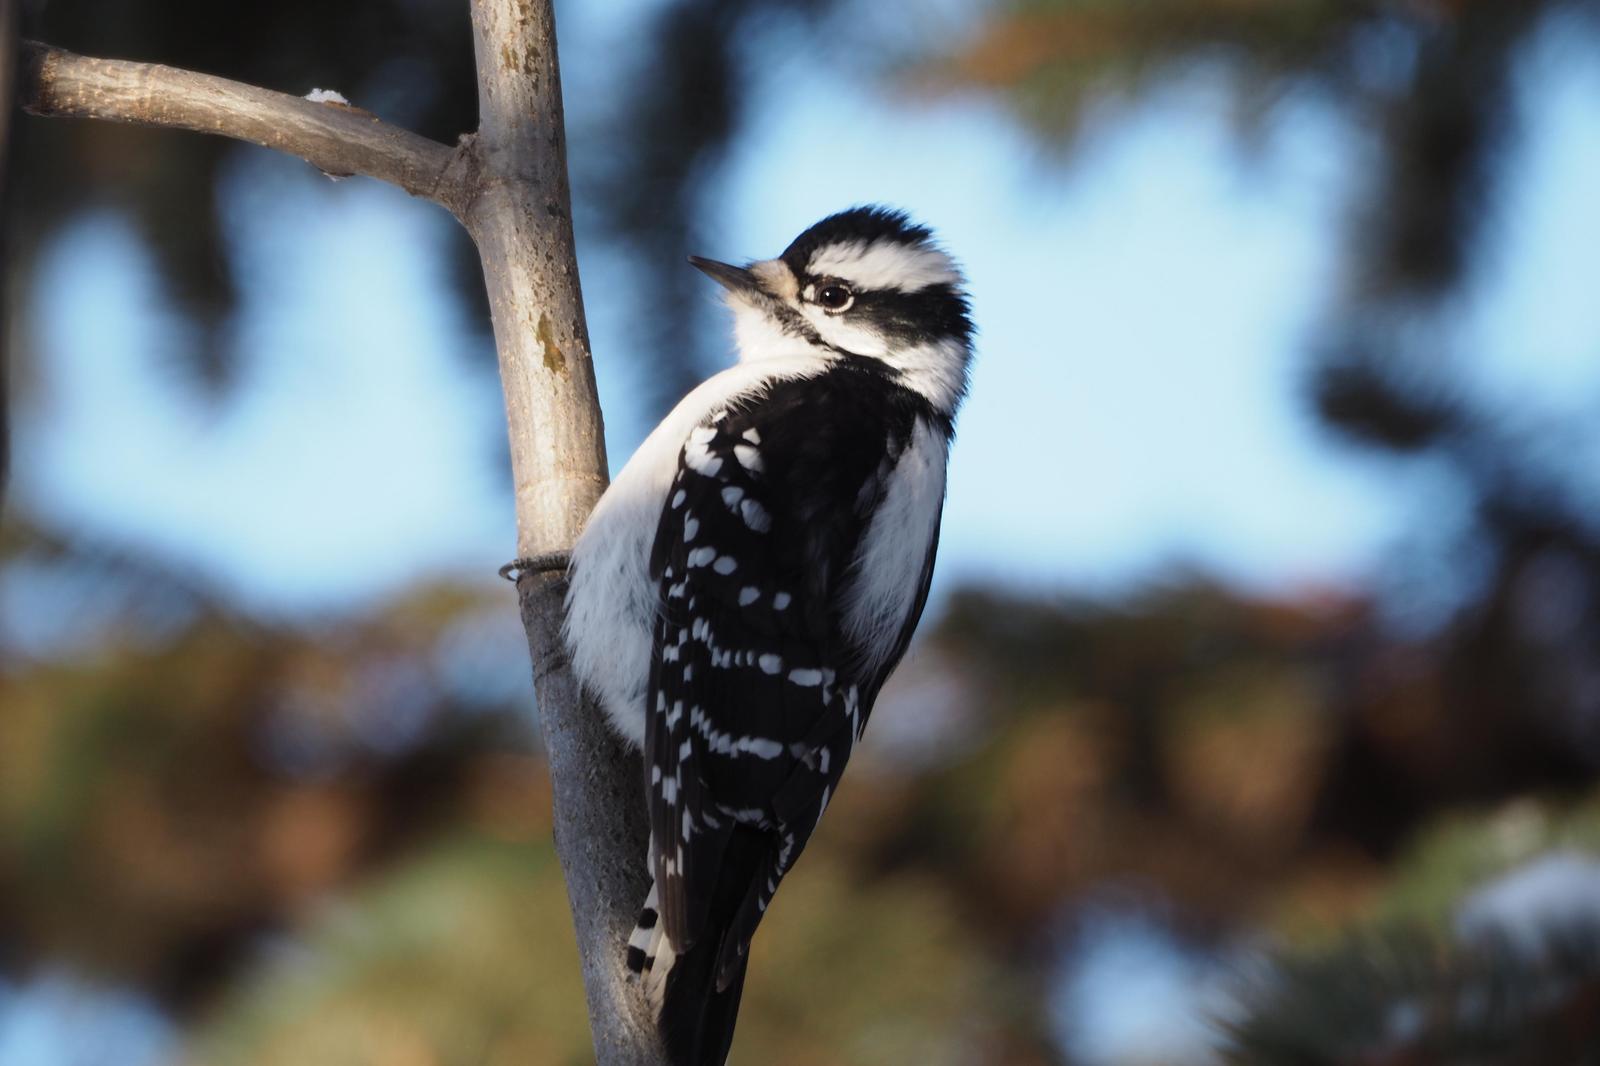 Downy Woodpecker Photo by Colin Hill